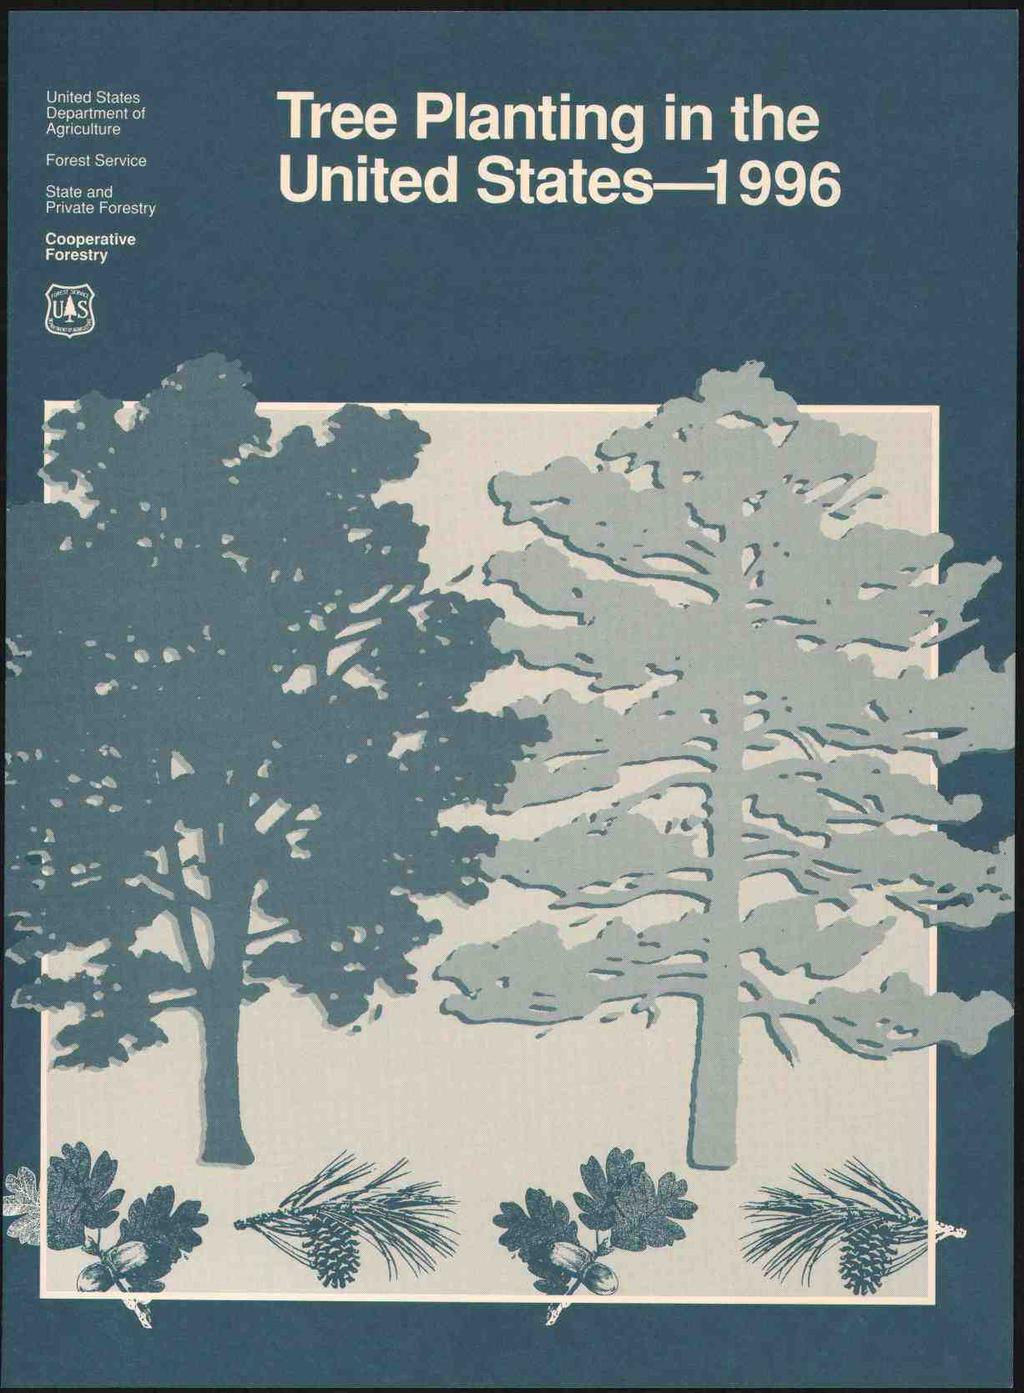 United States Department of Agriculture Forest Service State and Private